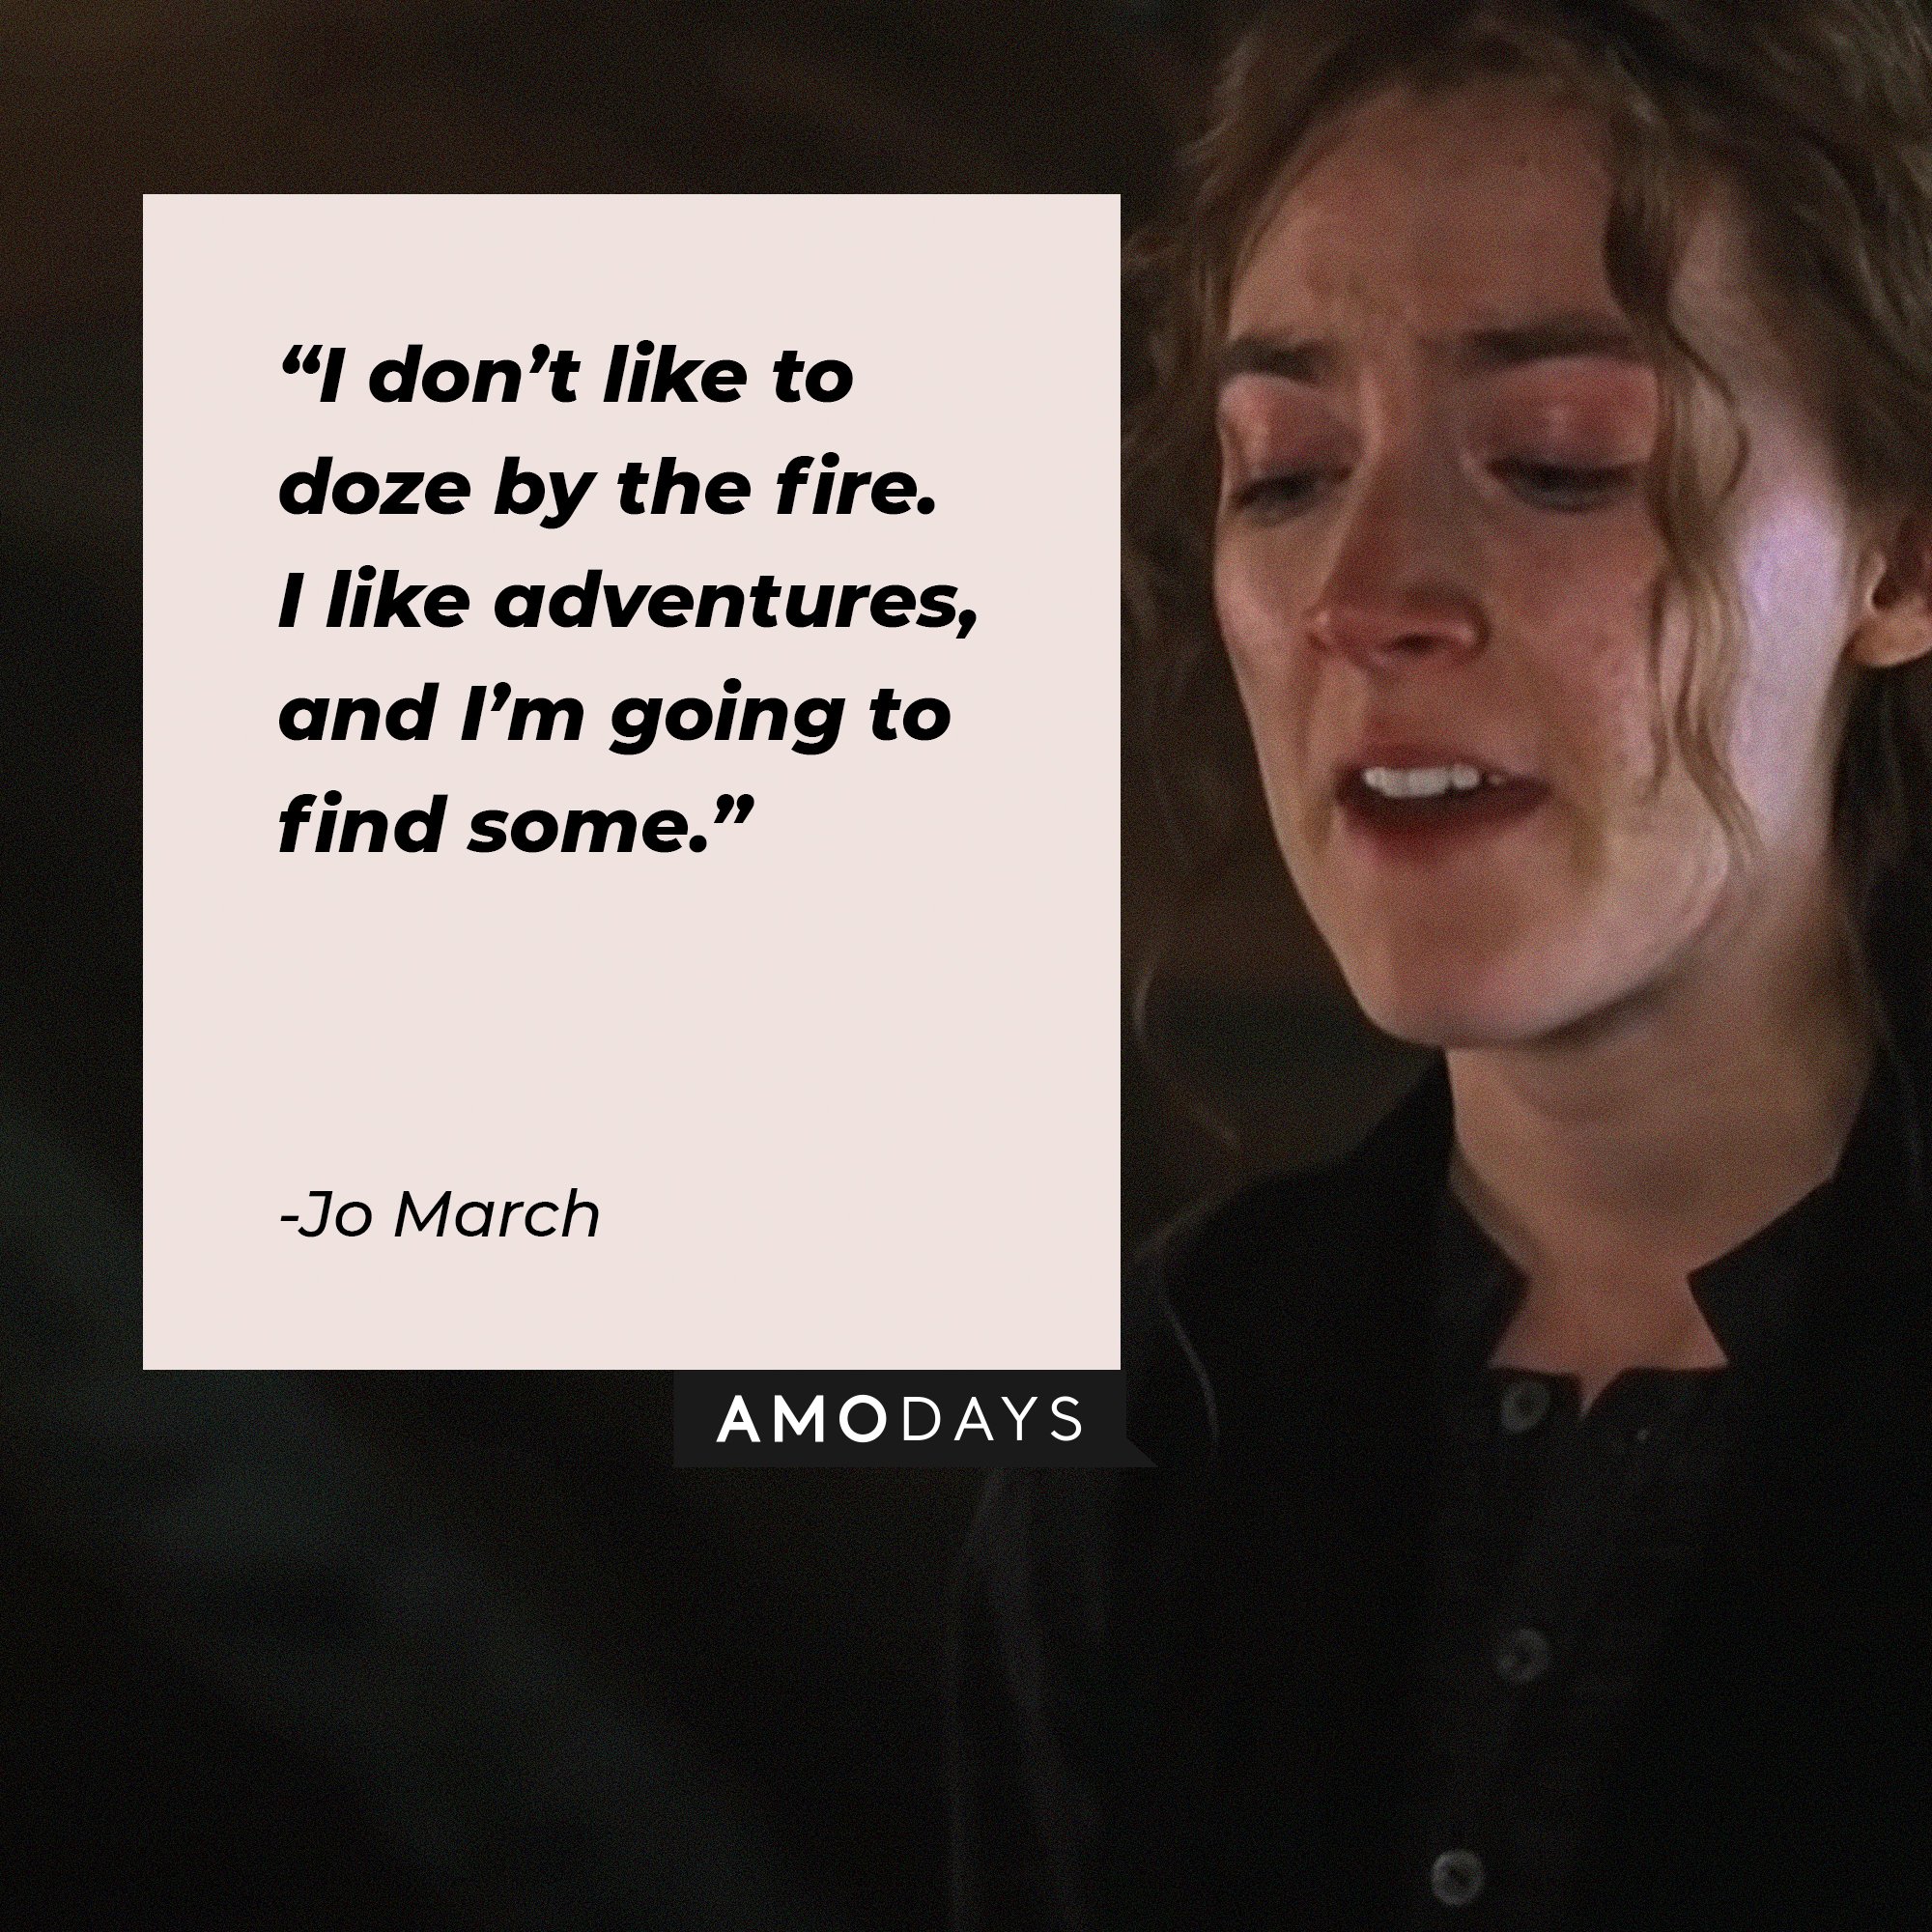 Jo March’s quote: “I don’t like to doze by the fire. I like adventures, and I’m going to find some.” | Image: AmoDays